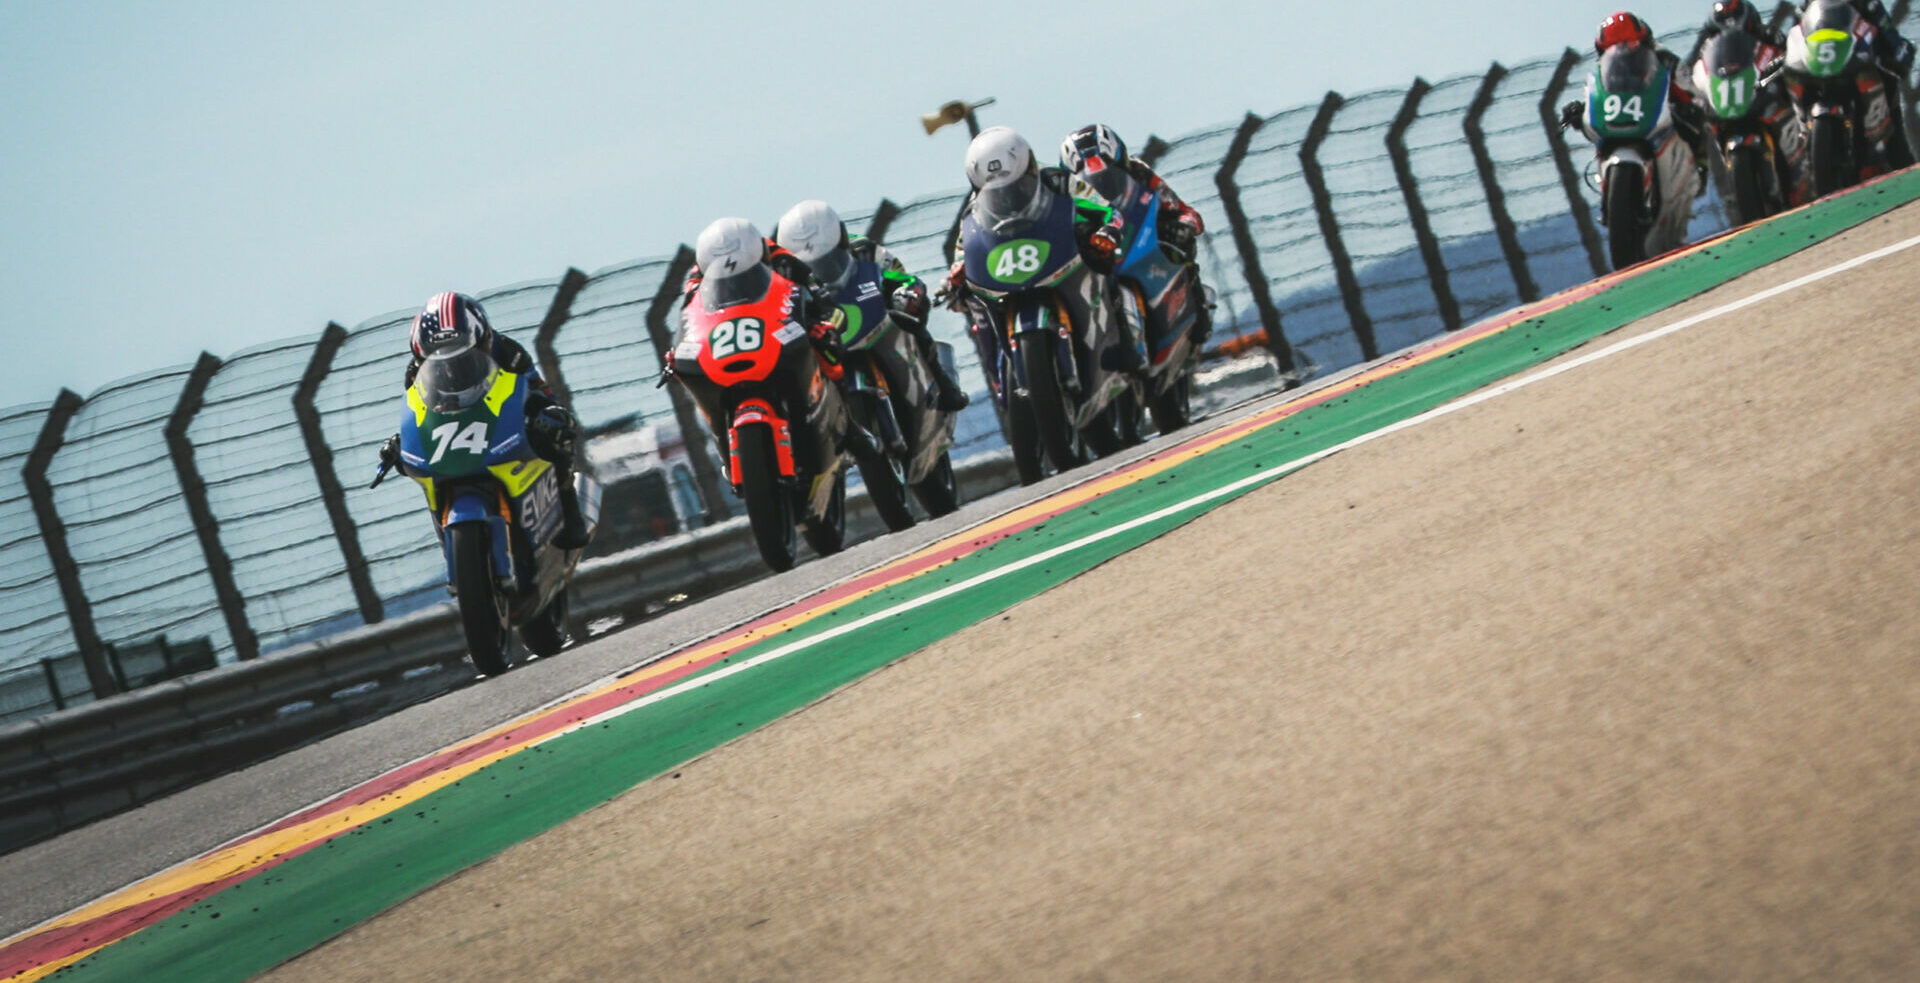 American Kensei Matsudaira Finishes P4 and P2 in MotorLand Aragon at RFME ESBK Moto4 Championship Round 2, Faces First Podium Loss Due to a Technicality